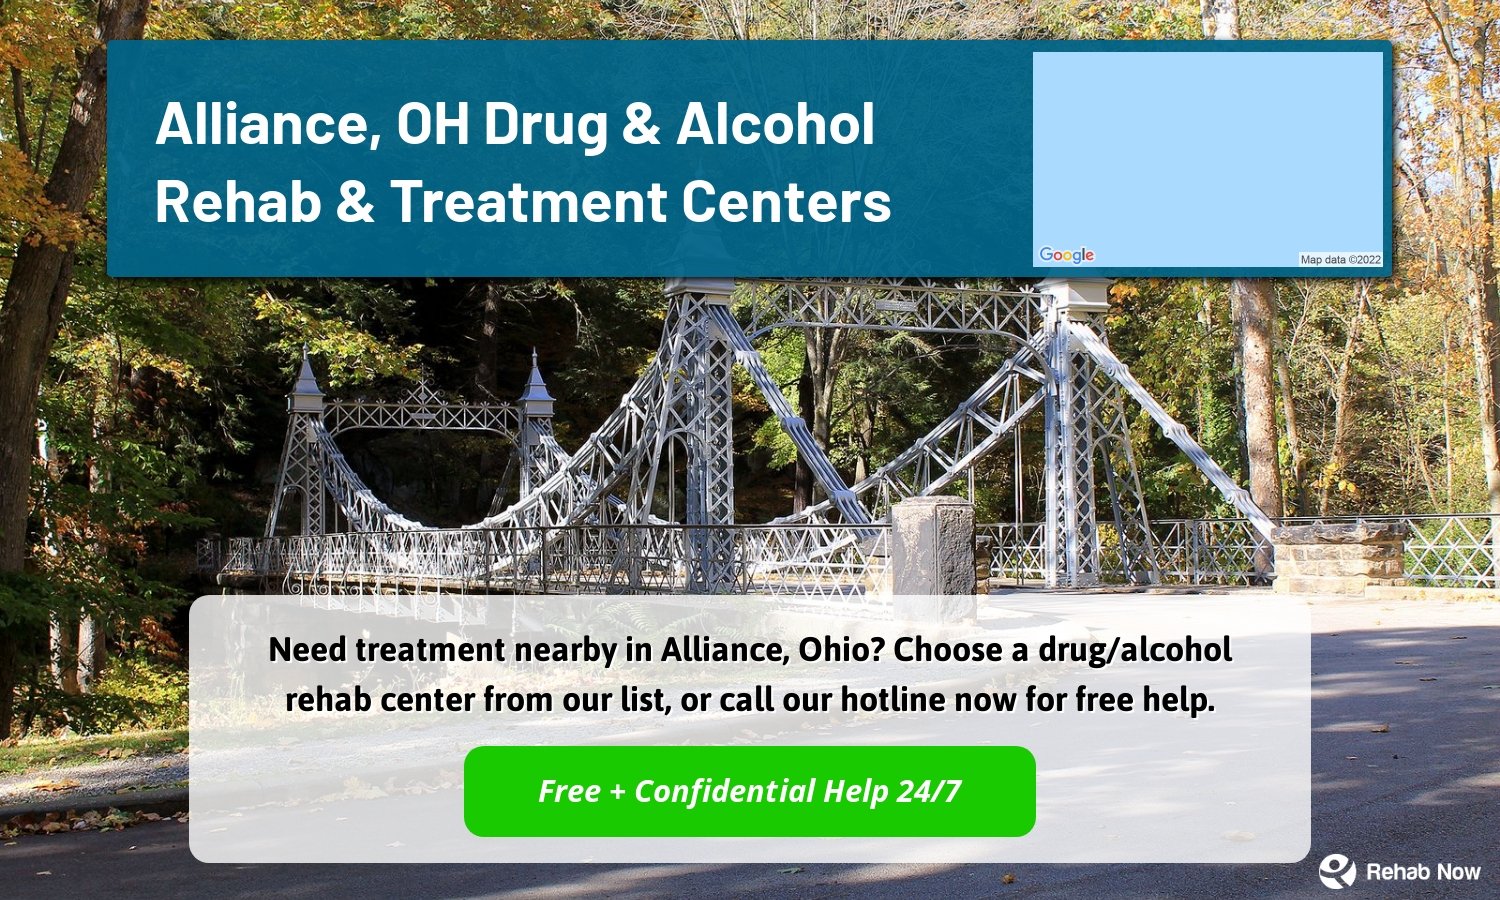 Need treatment nearby in Alliance, Ohio? Choose a drug/alcohol rehab center from our list, or call our hotline now for free help.